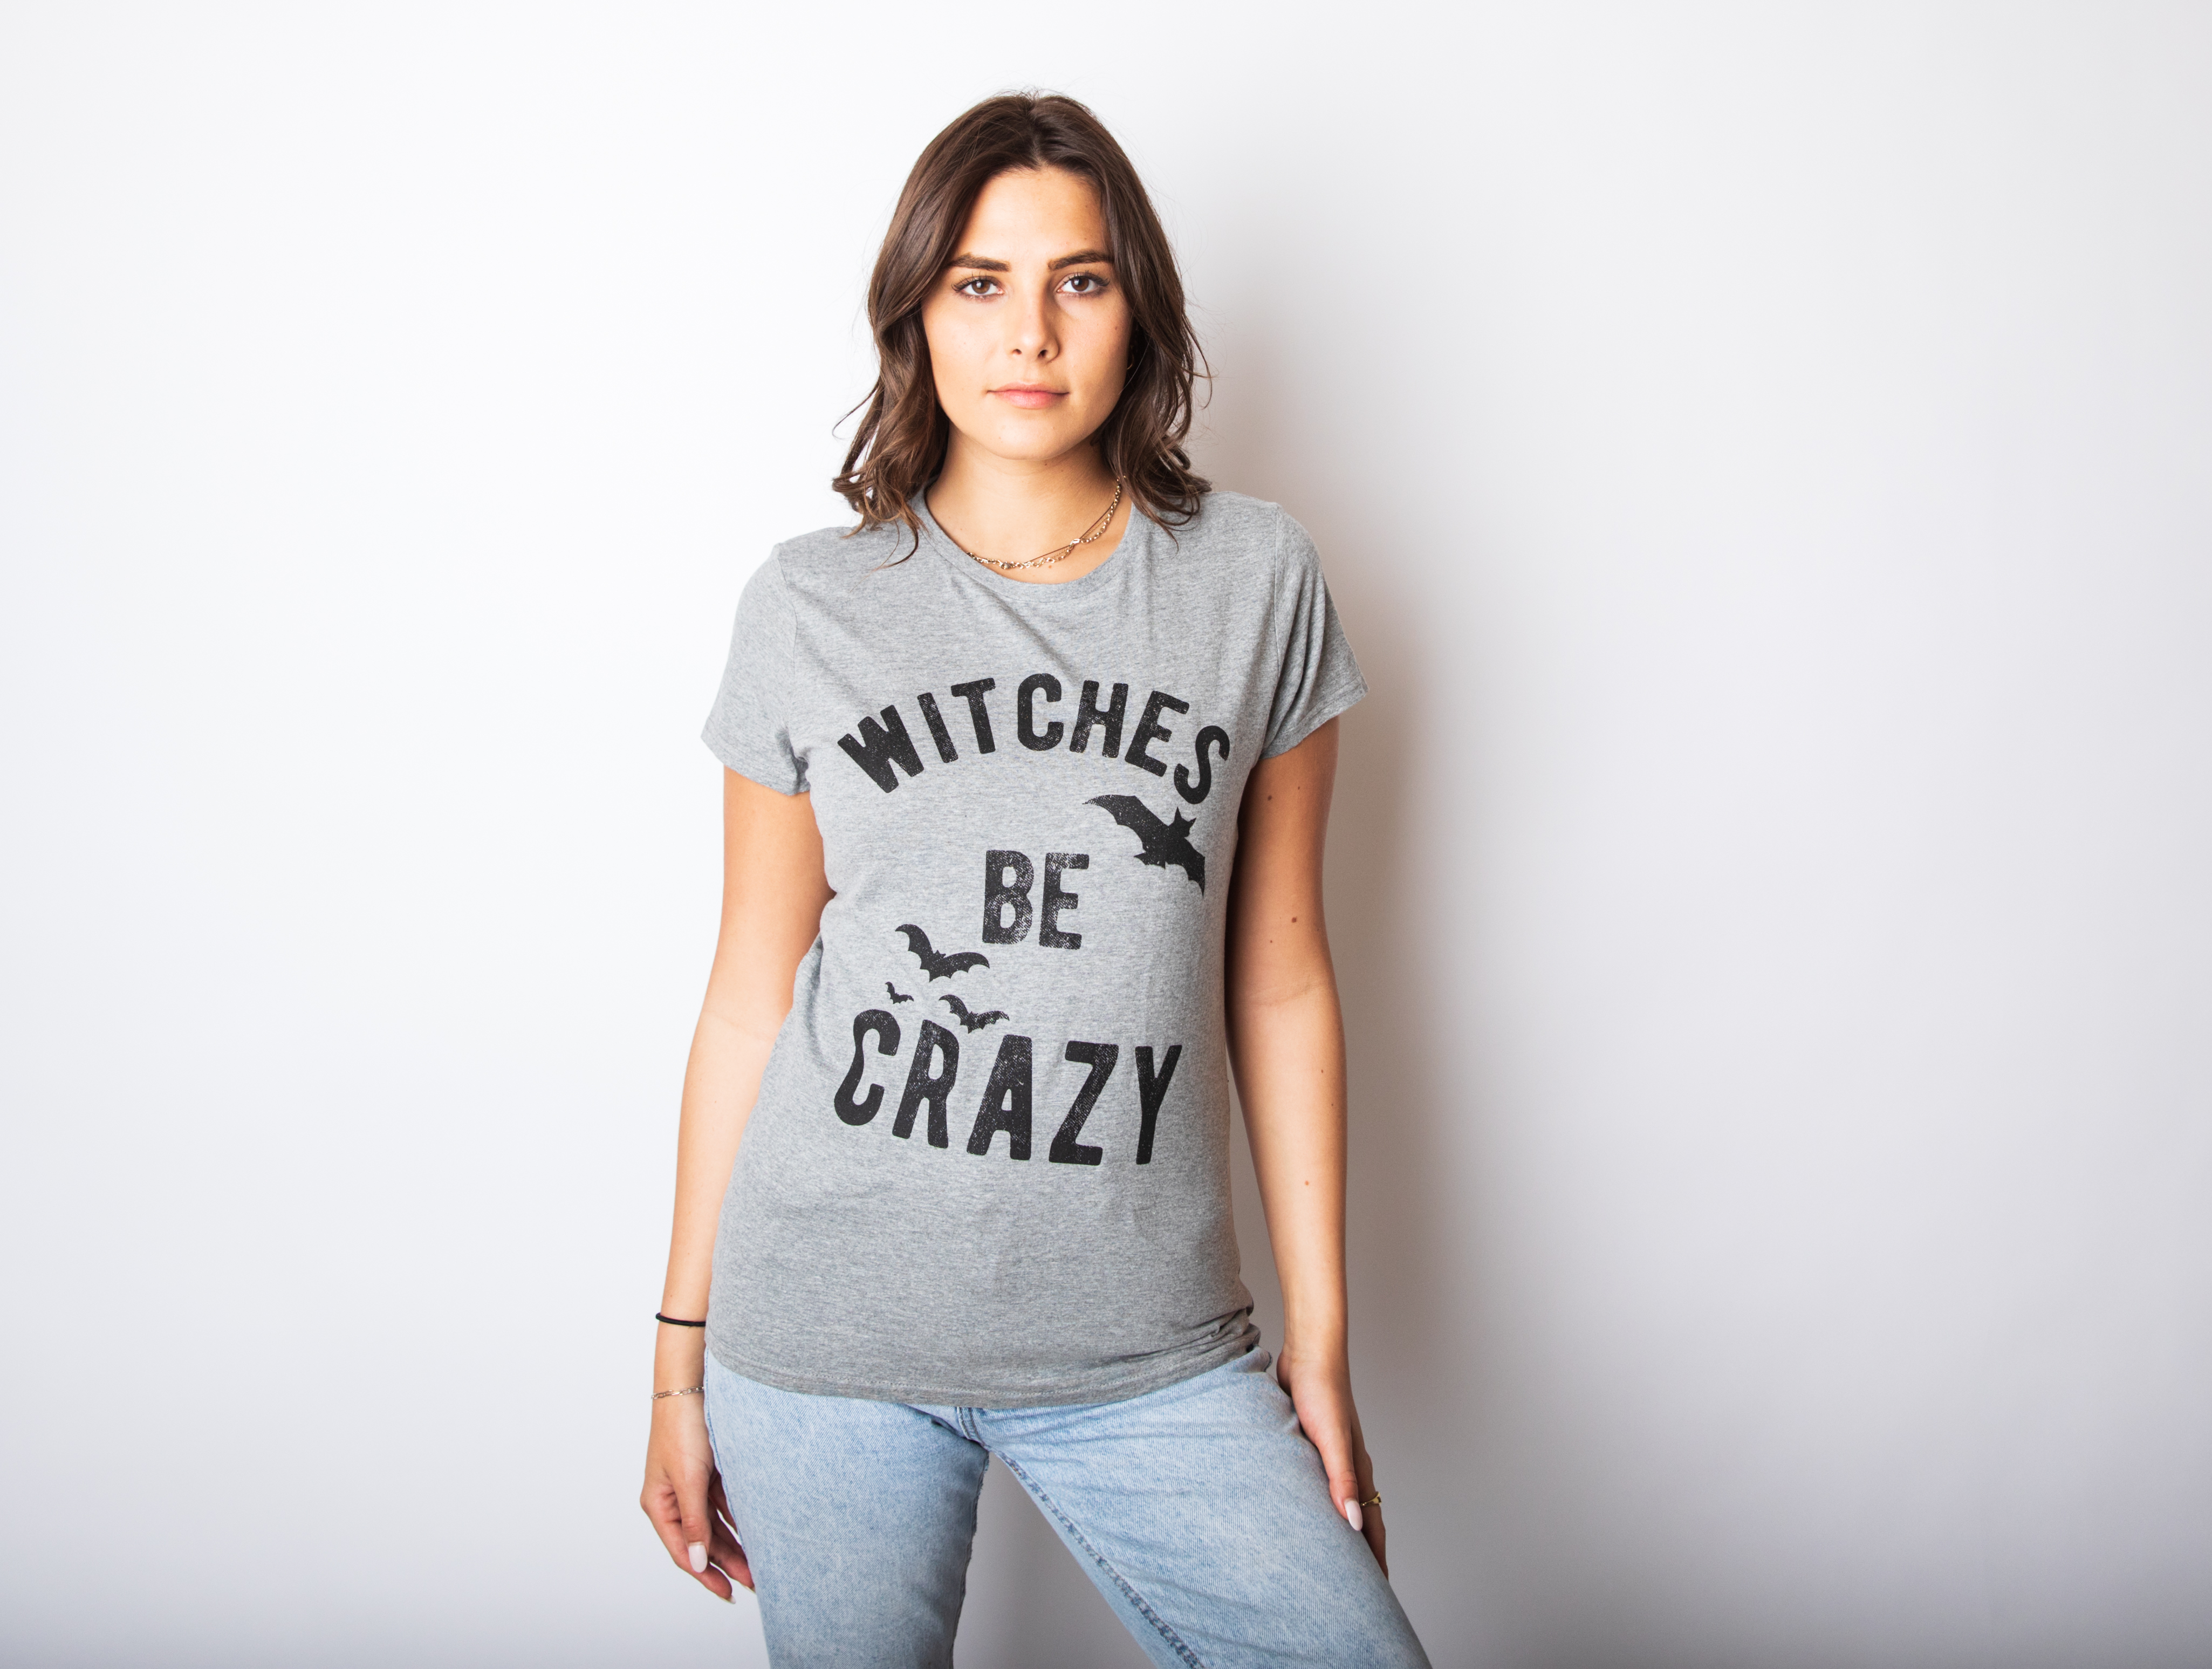 Womens Witches Be Crazy Tshirt Funny Party Tee For Ladies Womens Graphic Tees - image 2 of 9